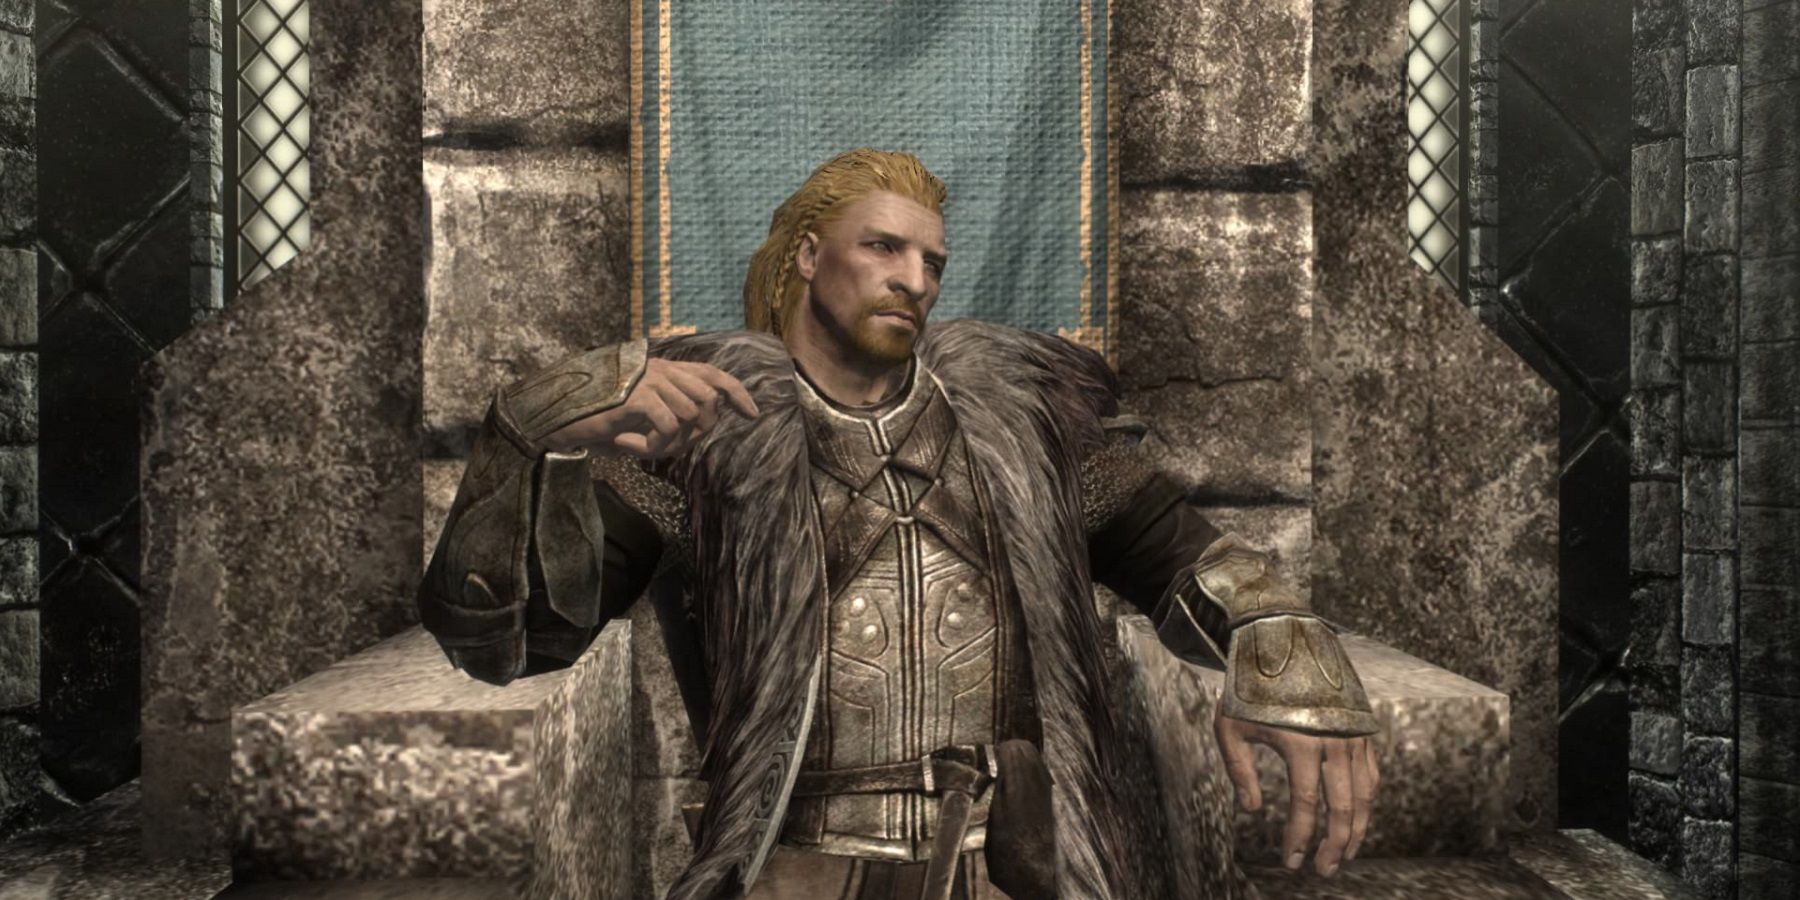 An image from The Elder Scrolls 5: skyrim showing Ulfric Stormcloak on a throne.